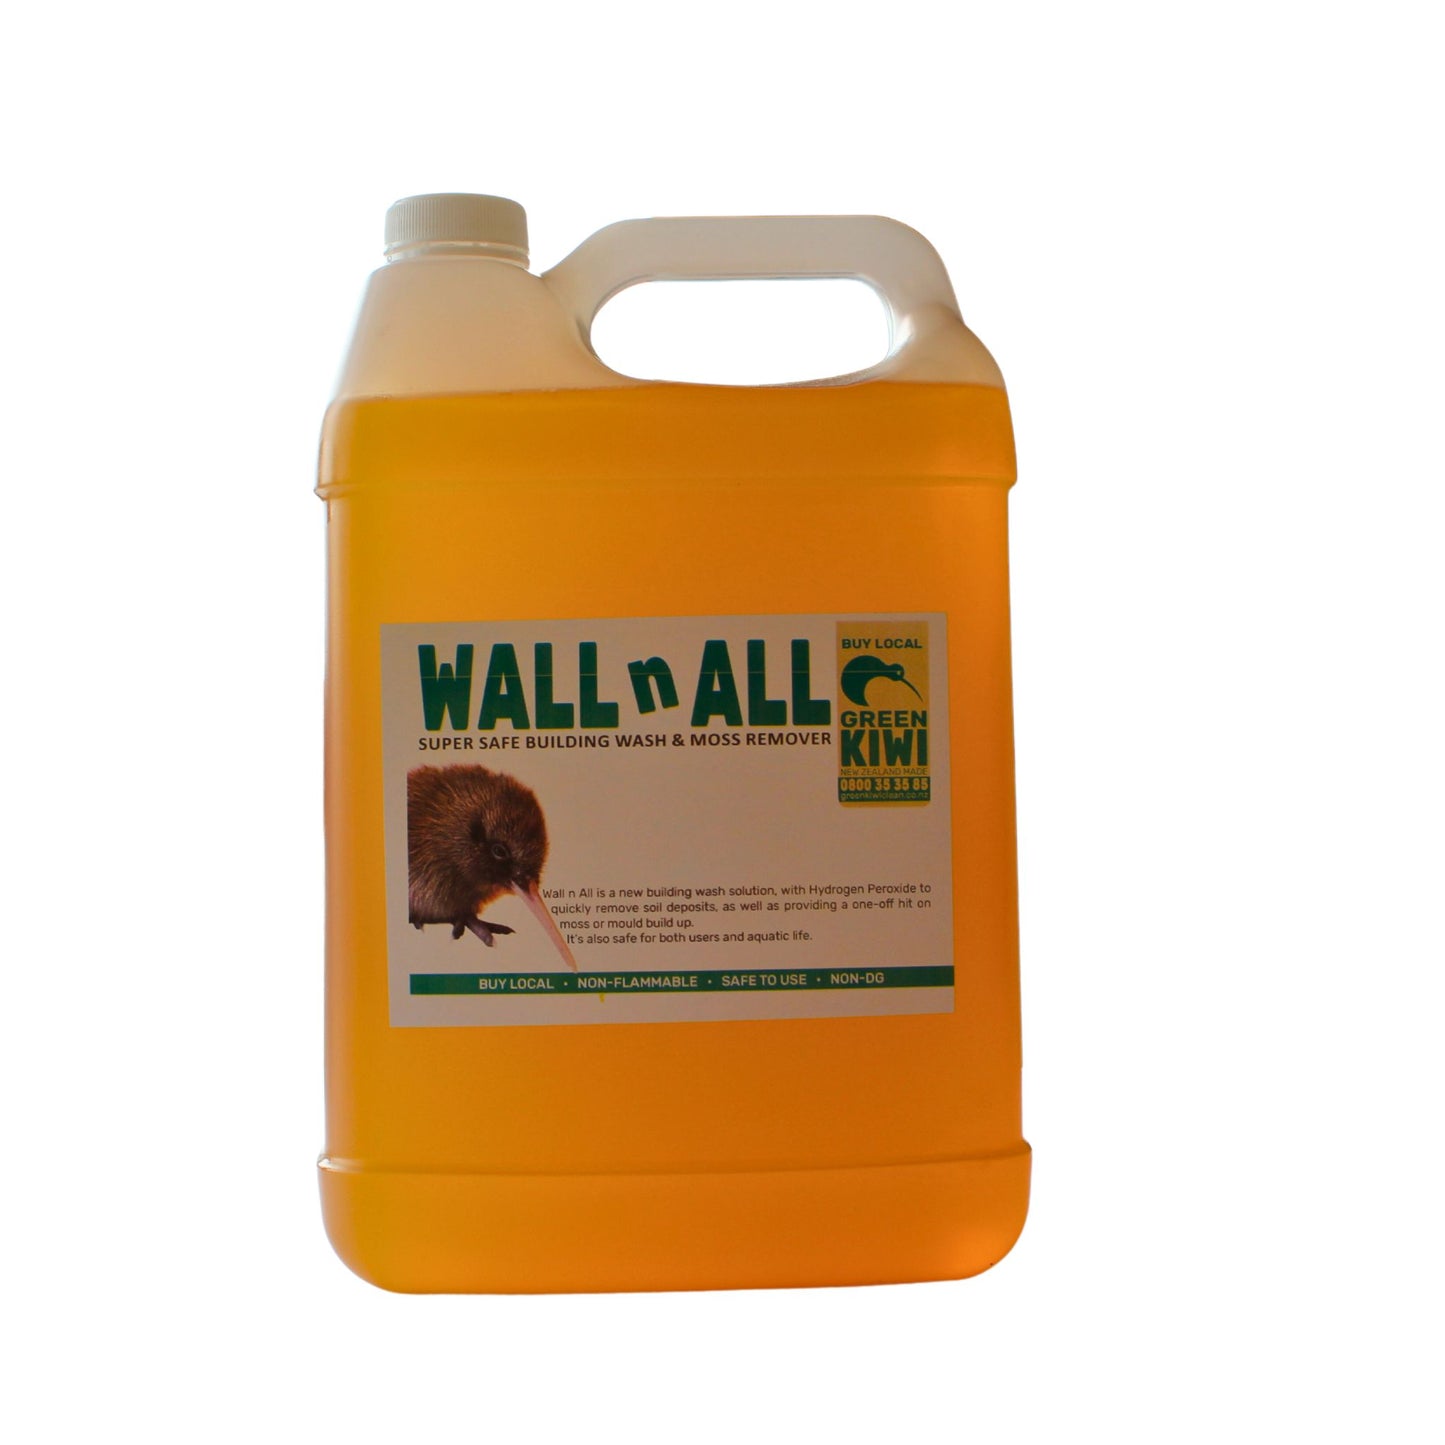 Wall n All - building wash & moss remover